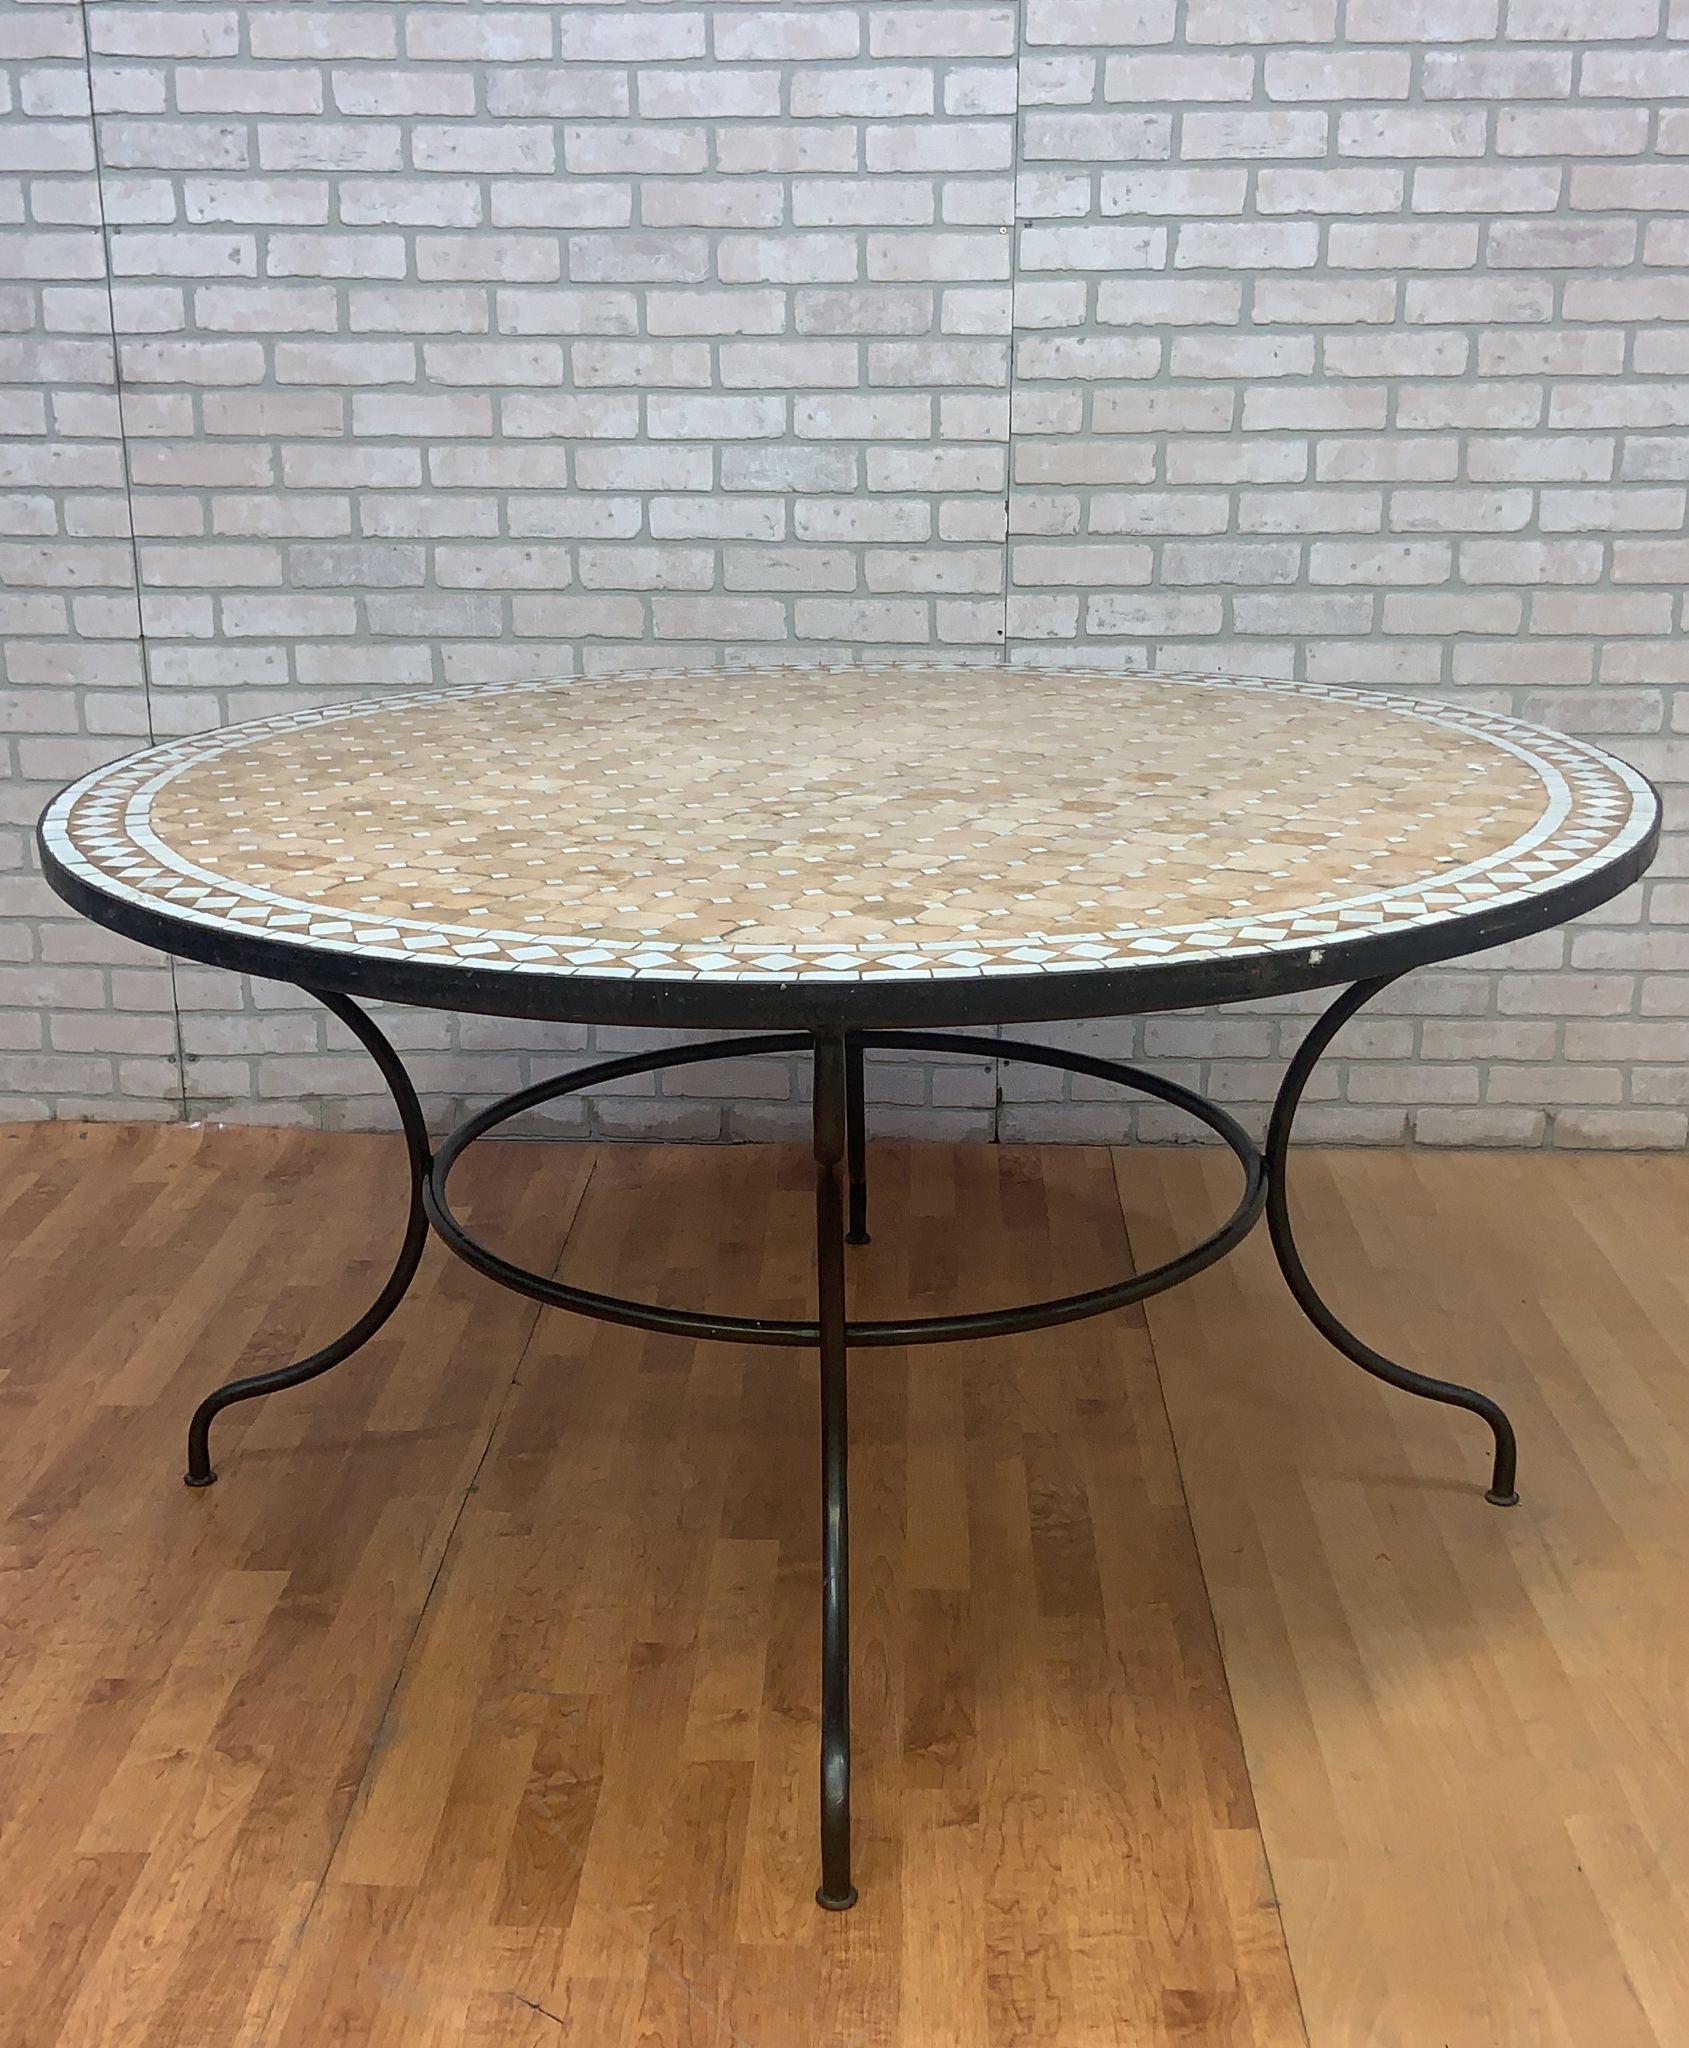 20th Century Vintage Moroccan Mosaic Tile Indoor/Outdoor Dining Table